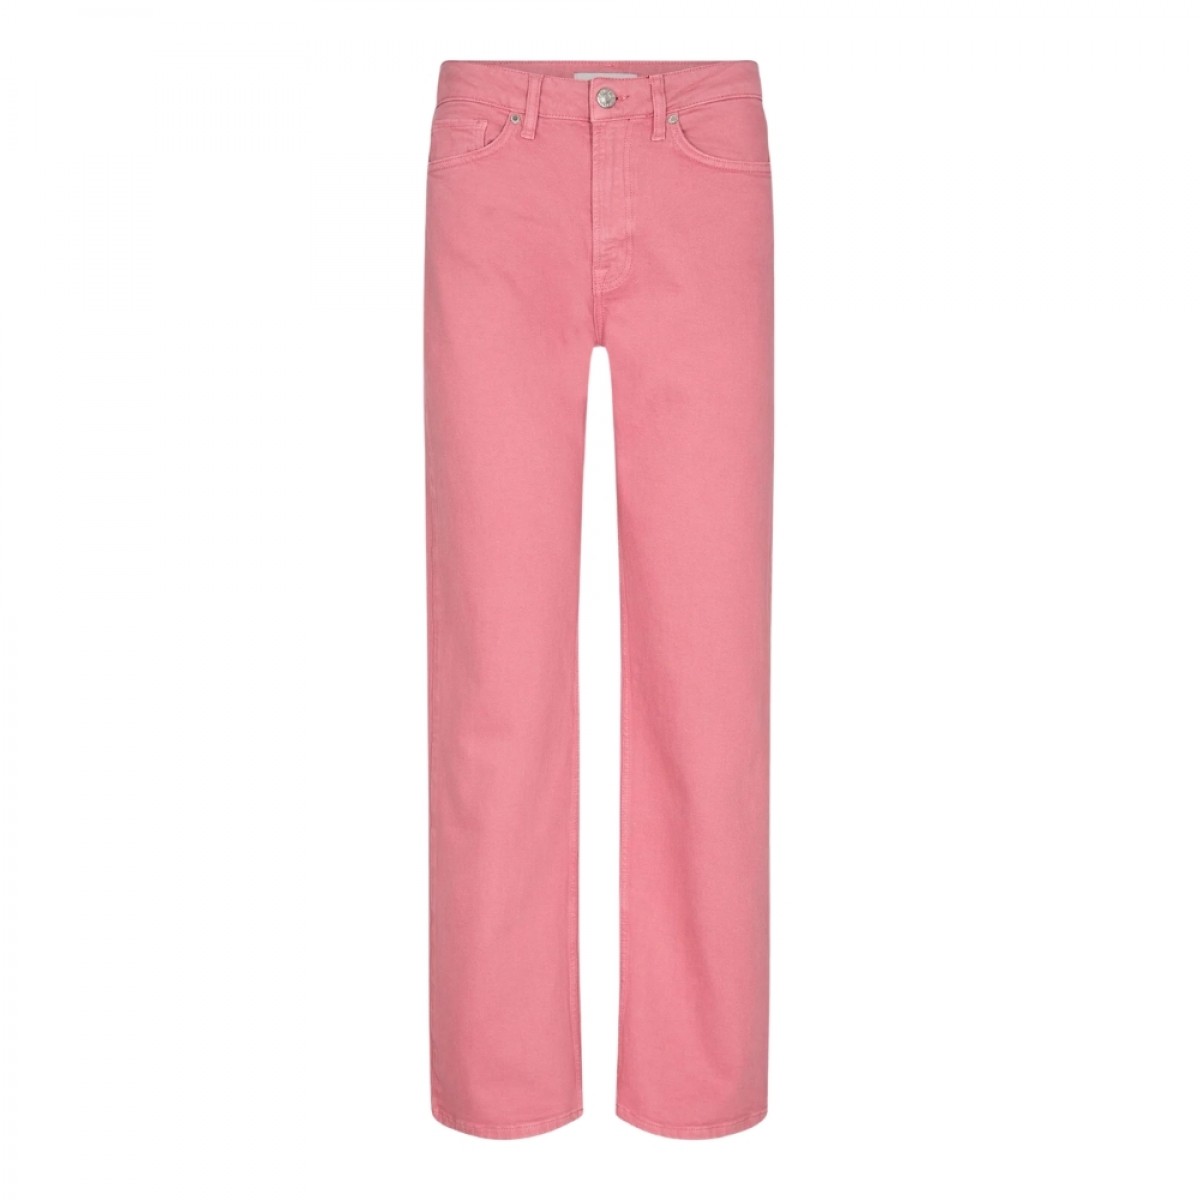 trw-brown jeans coloured - blush - front